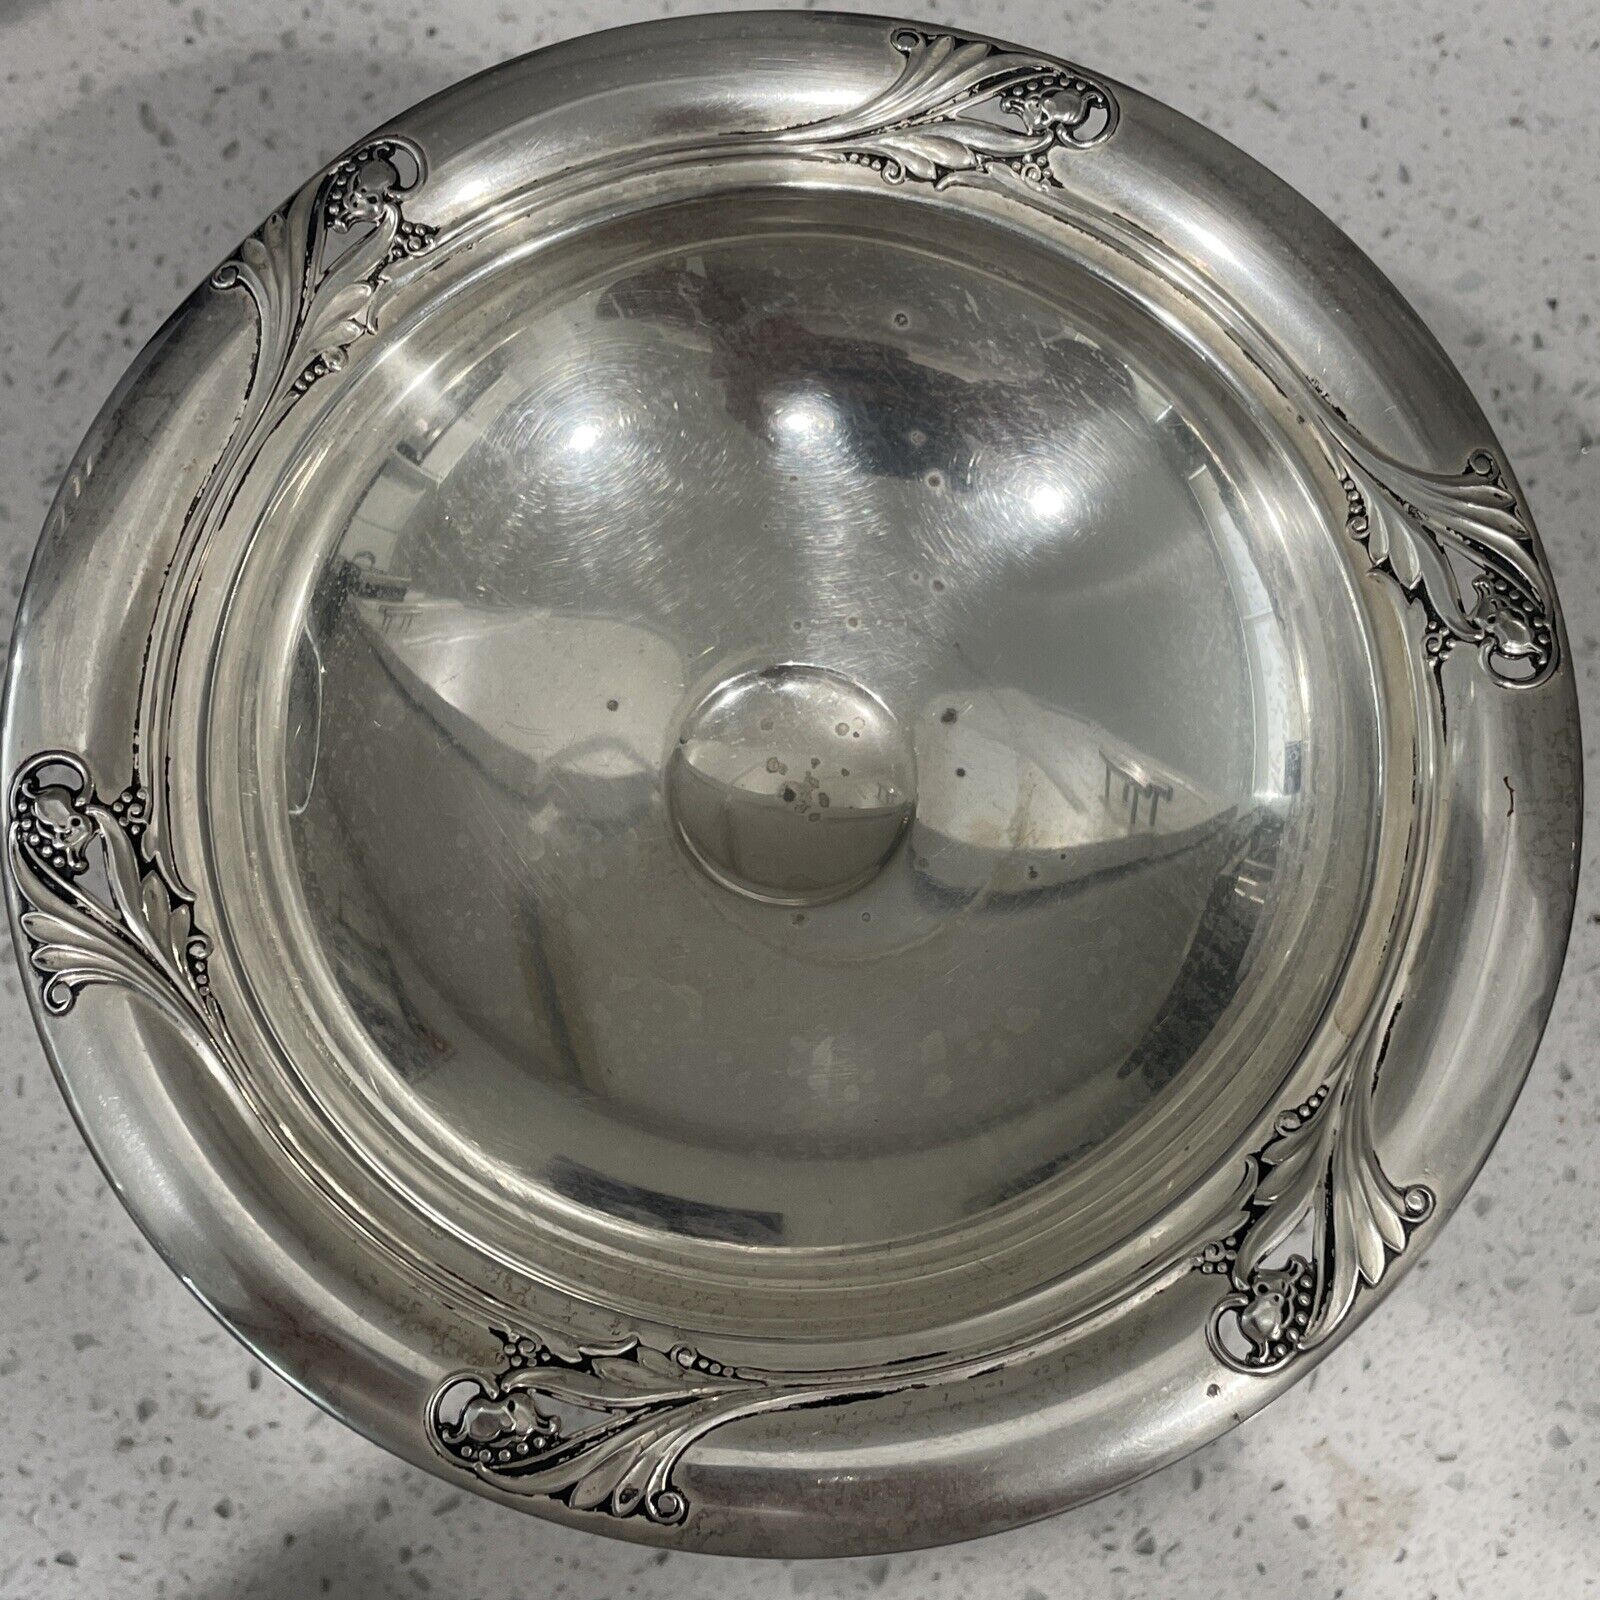 INTERNATIONAL STERLING SILVER 6 IN. HT. COMPOTE SPRING GLORY PATTERN